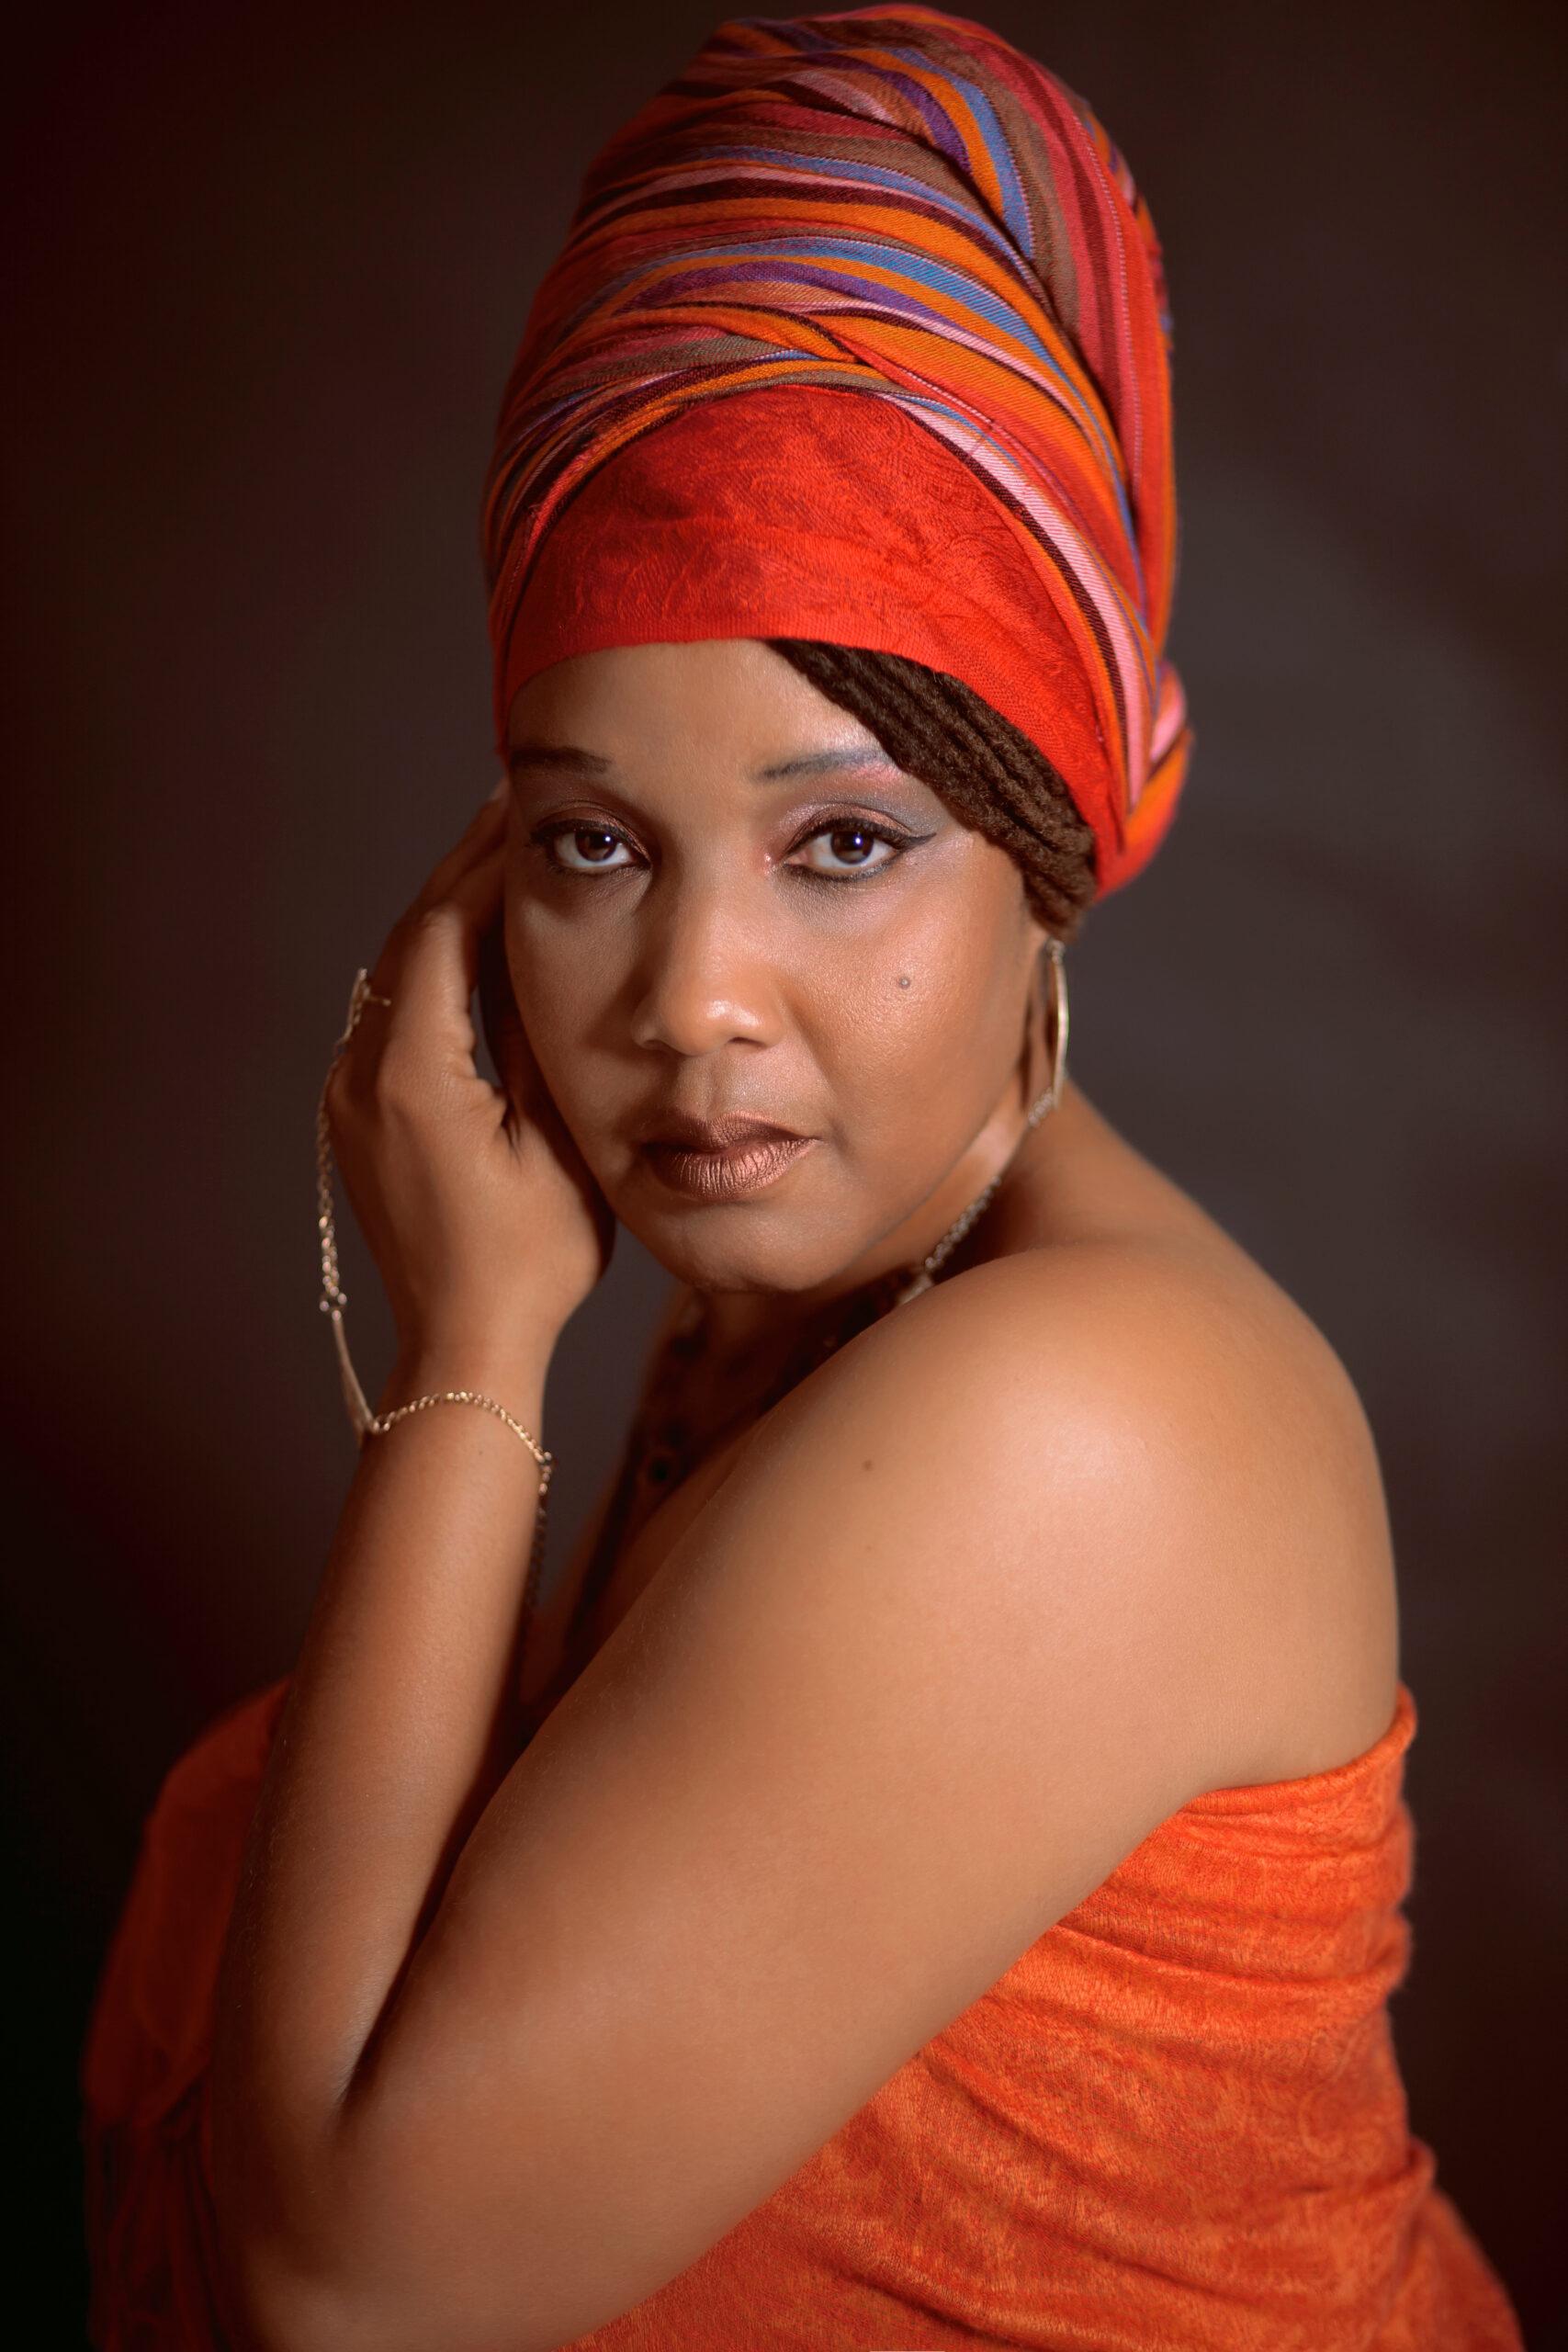 Black Woman with braids and red turban